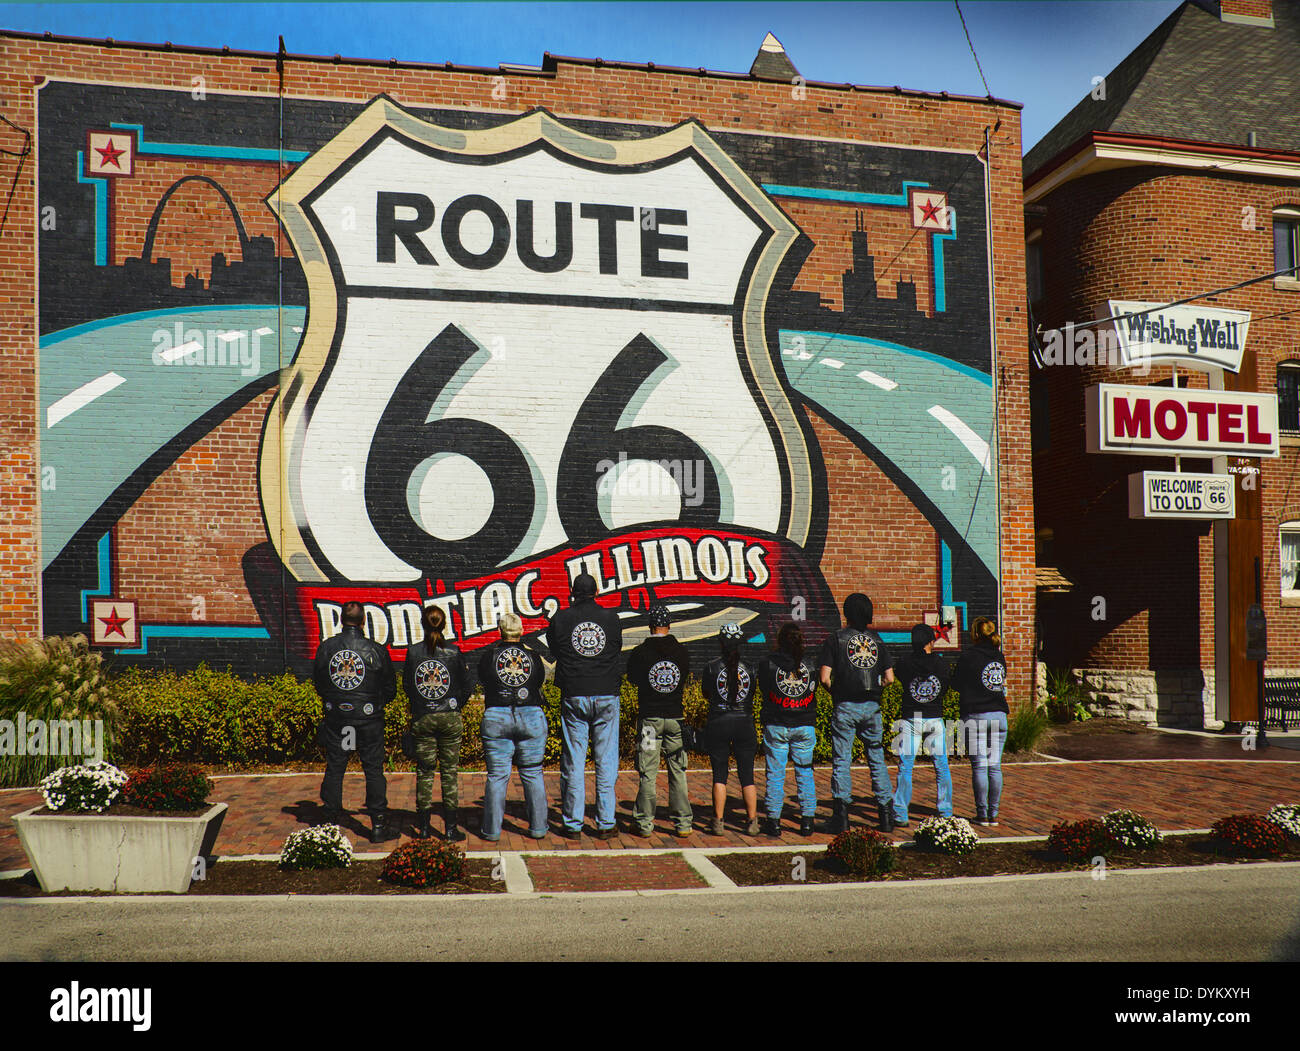 Coyotes Malaga motorcycle club viewing the Route 66 mural  in Pontiac, Illinois, a town along Route 66 Stock Photo